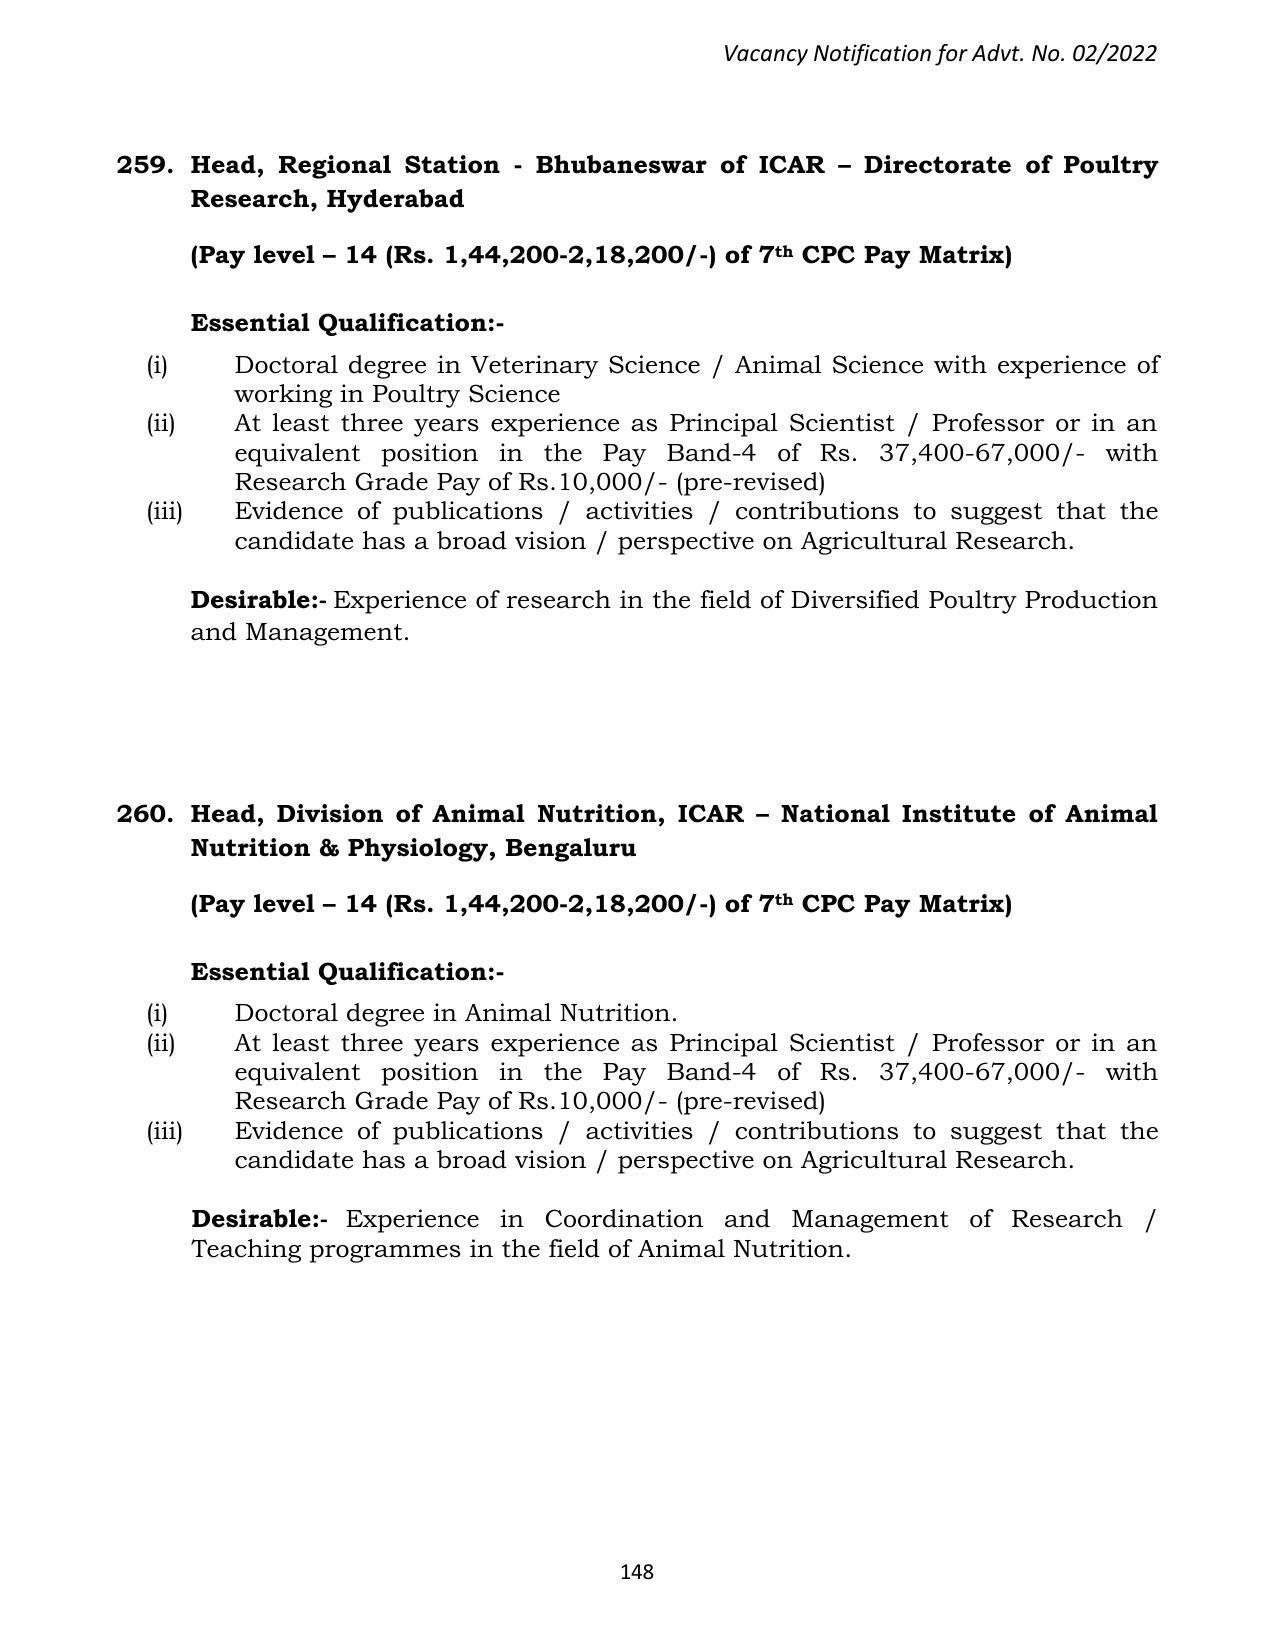 ASRB Non-Research Management Recruitment 2022 - Page 196